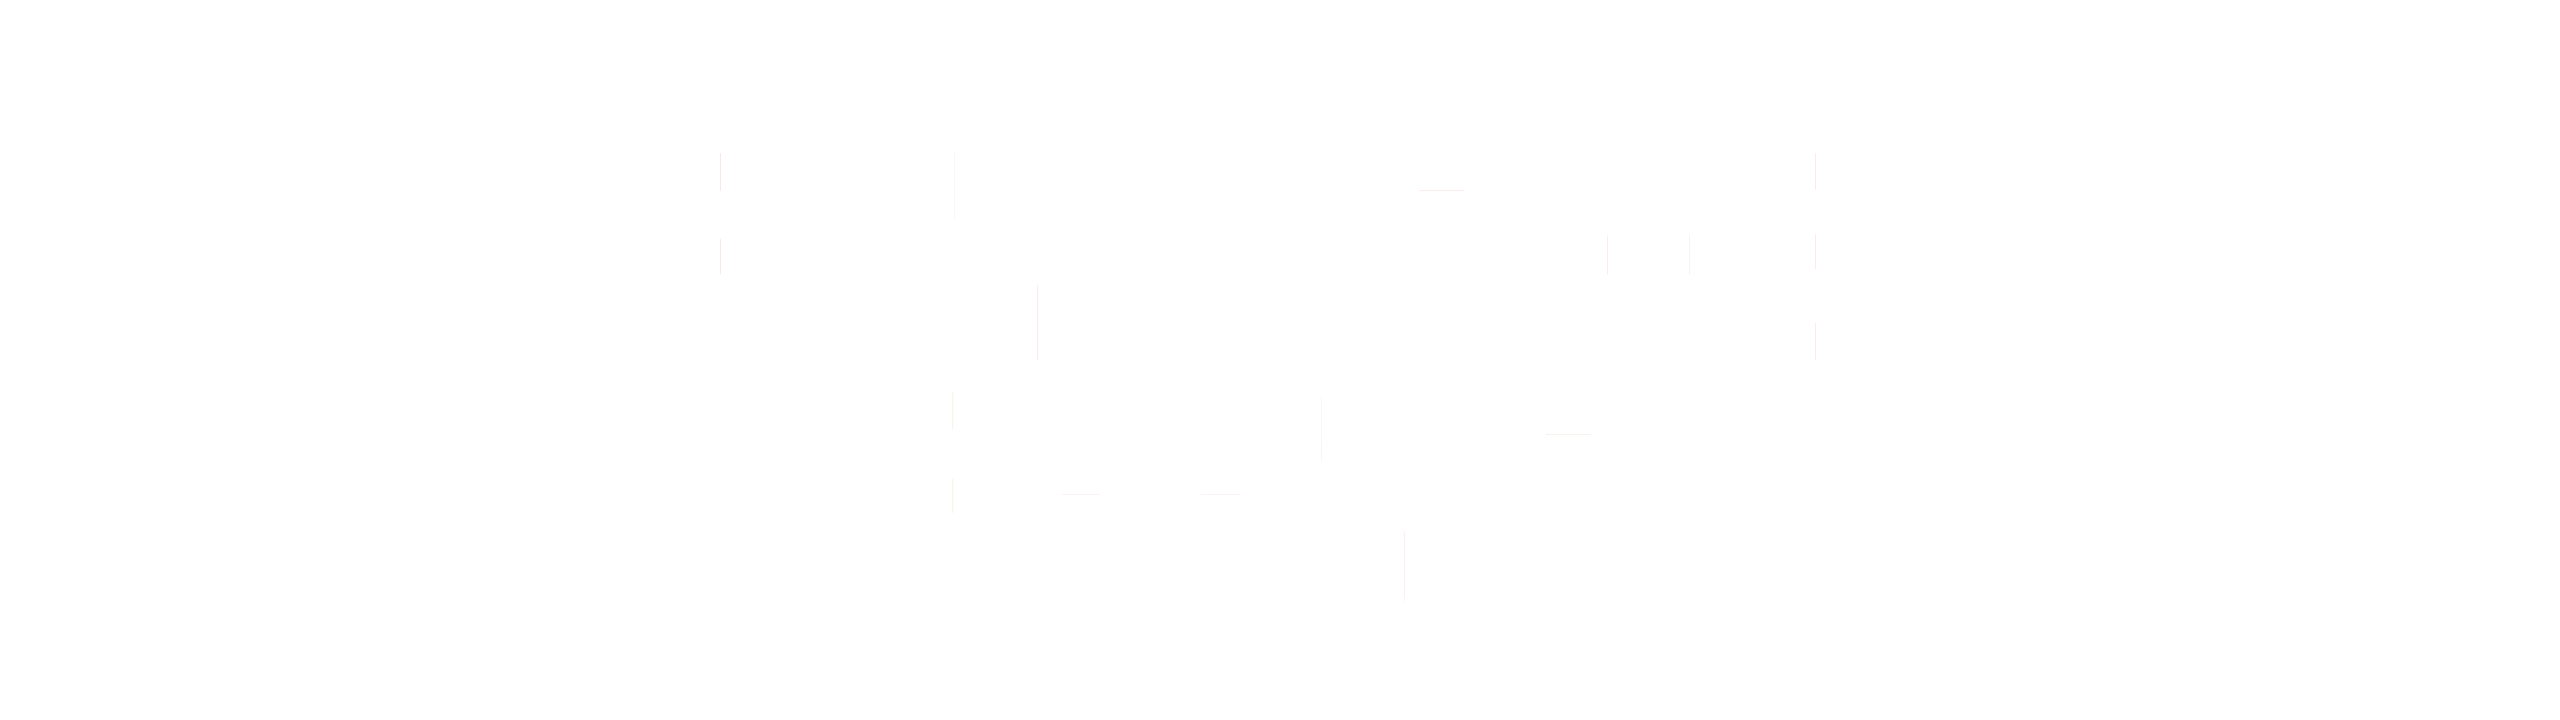 Find the Font